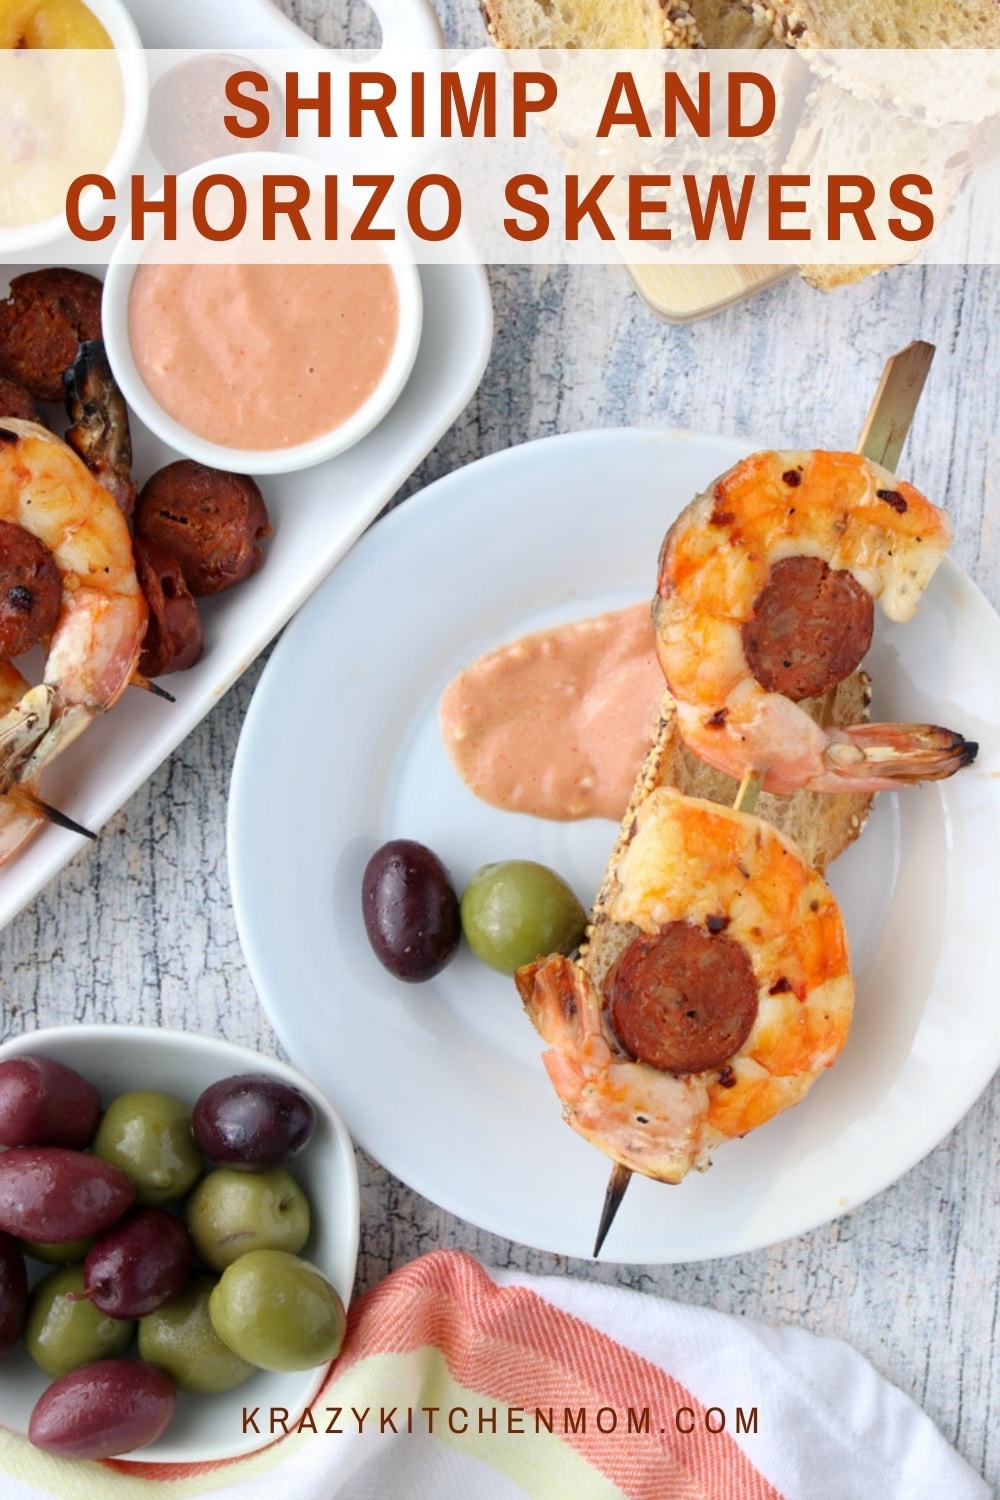 These skewers are super easy and super tasty. They are one of our summer grilling favorite recipes. via @krazykitchenmom